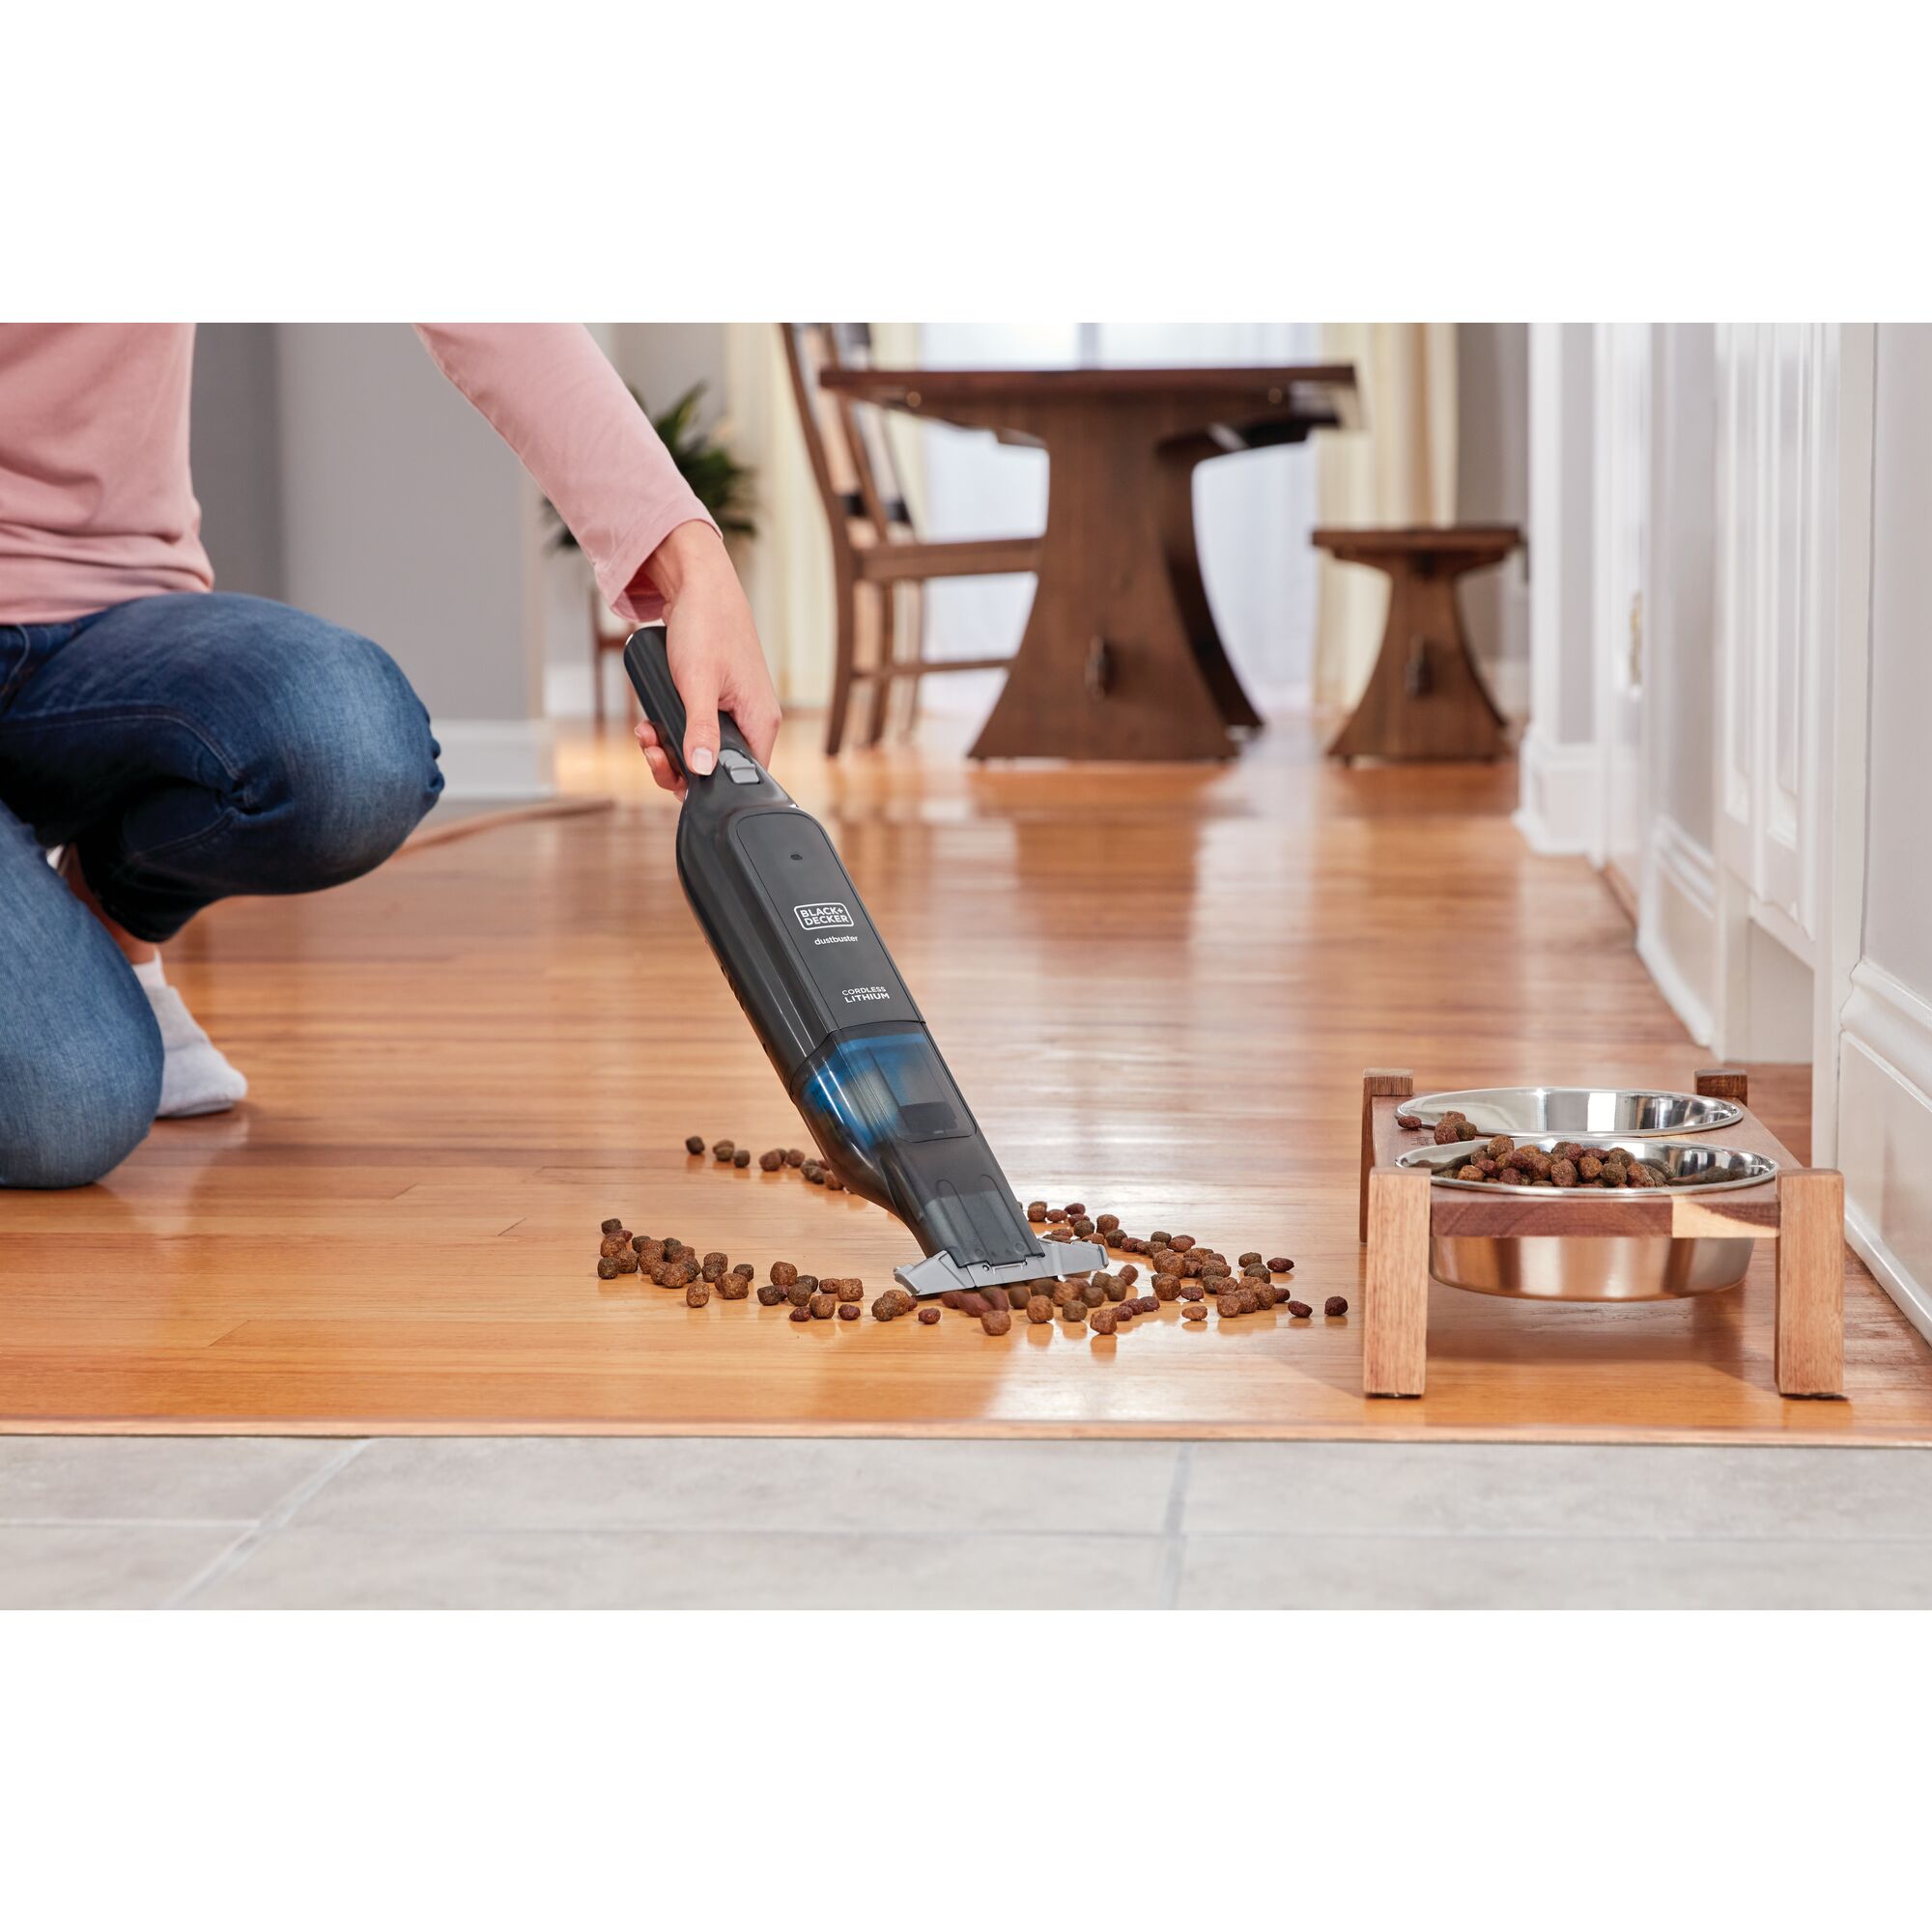 dustbuster Advanced Clean Cordless Hand Vacuum being used to pick up pet food dropped on floor.